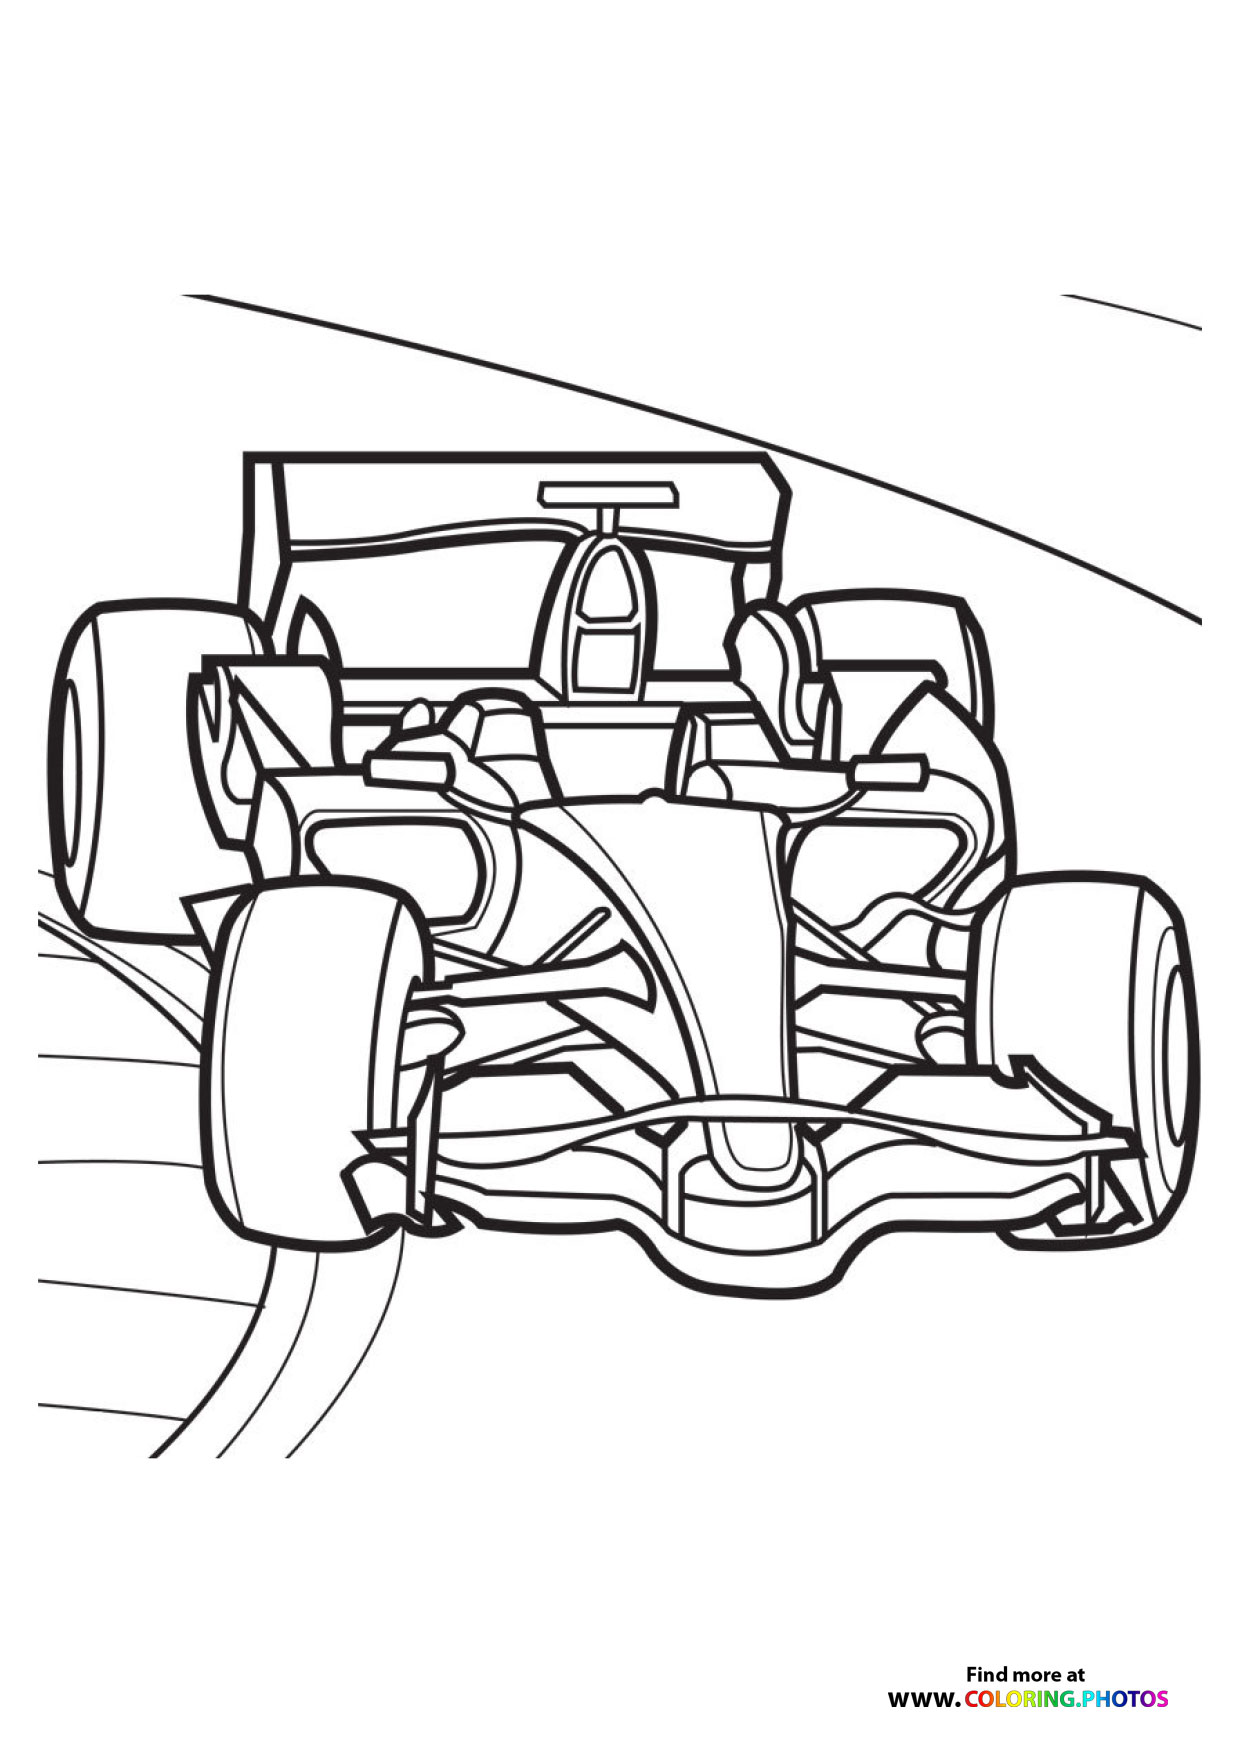 Formula 1 car - Coloring Pages for kids